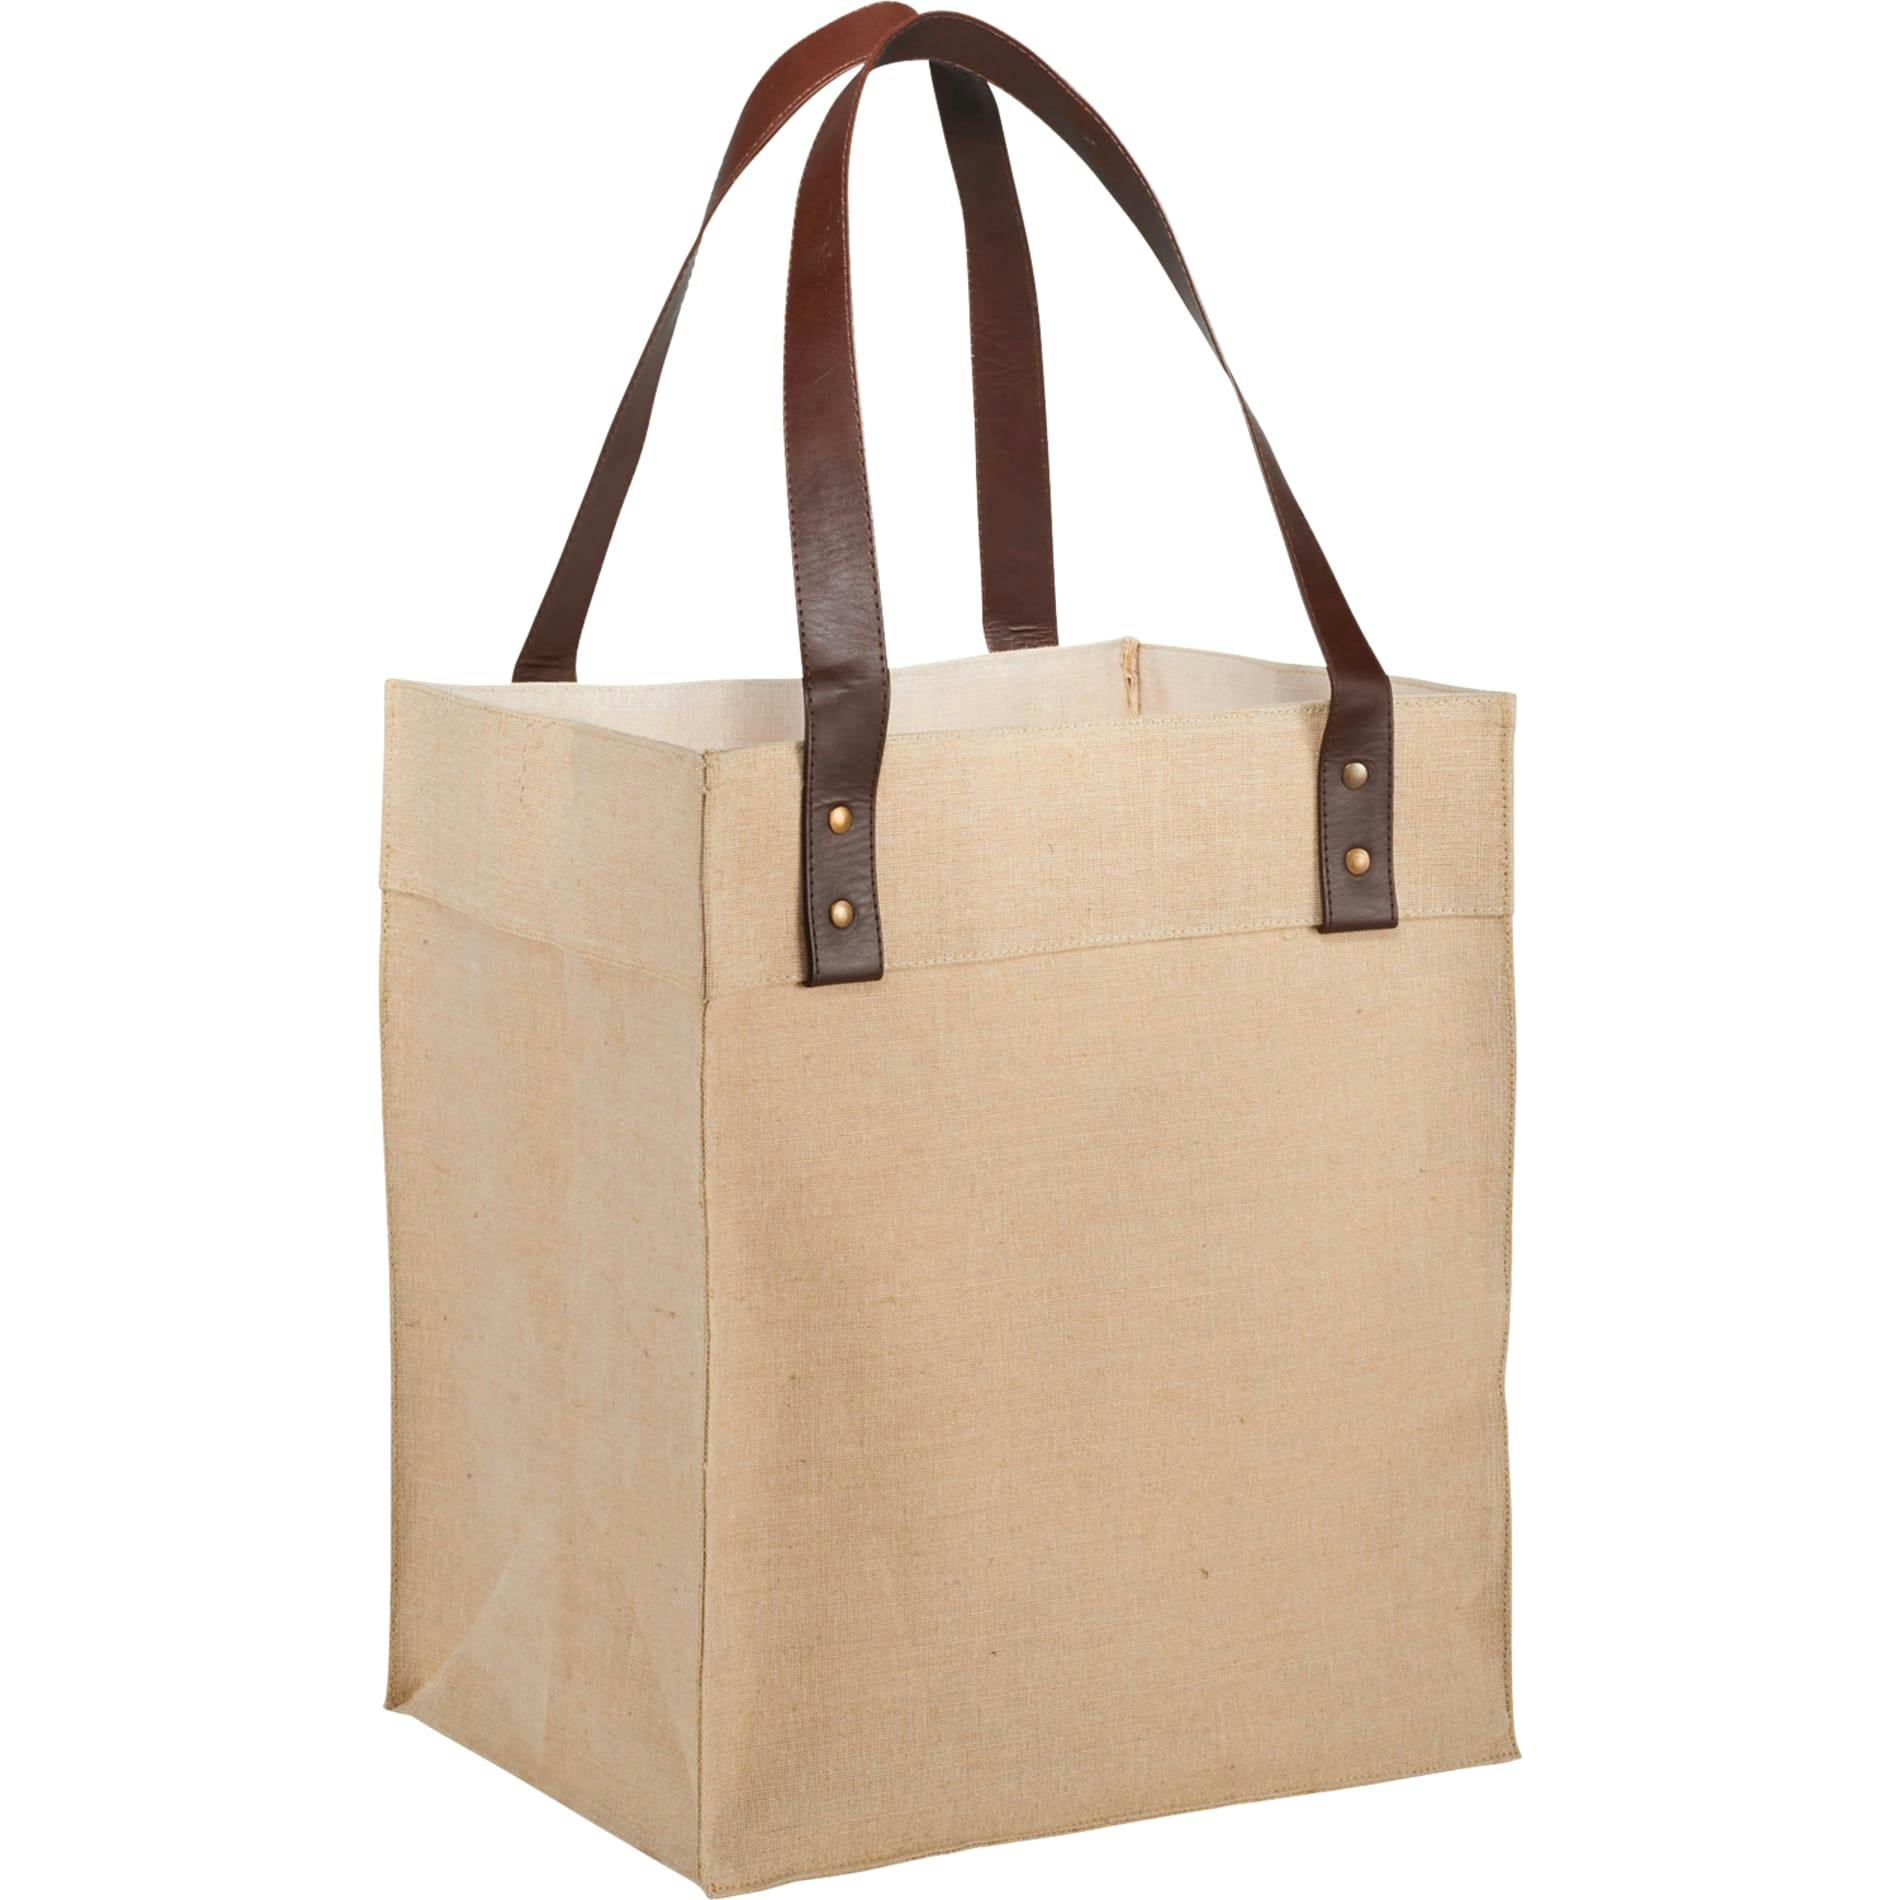 Westover Premium Grocery Tote - additional Image 5